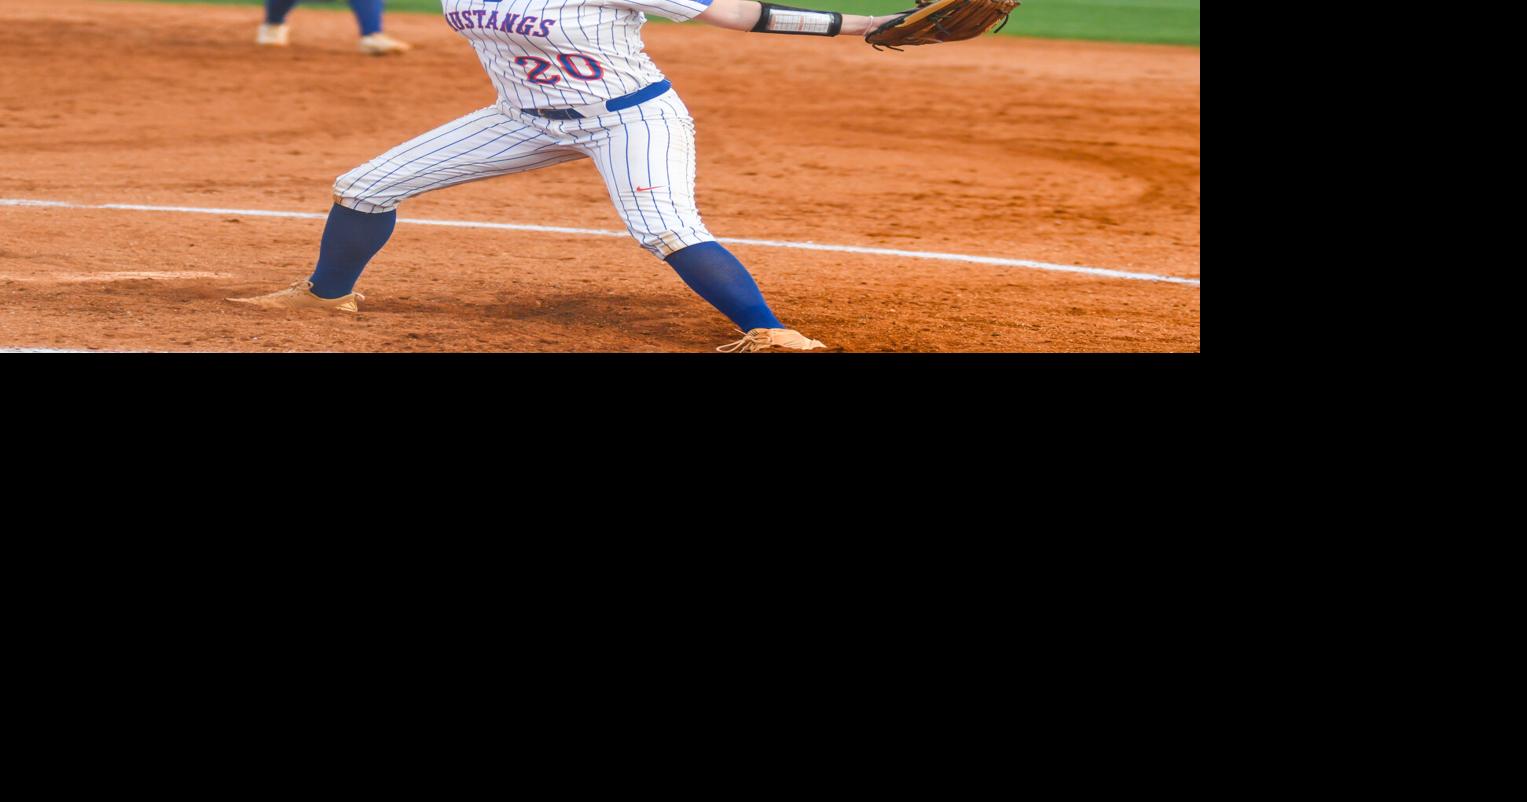 Local Sports: Midland Valley softball triumphs over Easley in playoff matchup